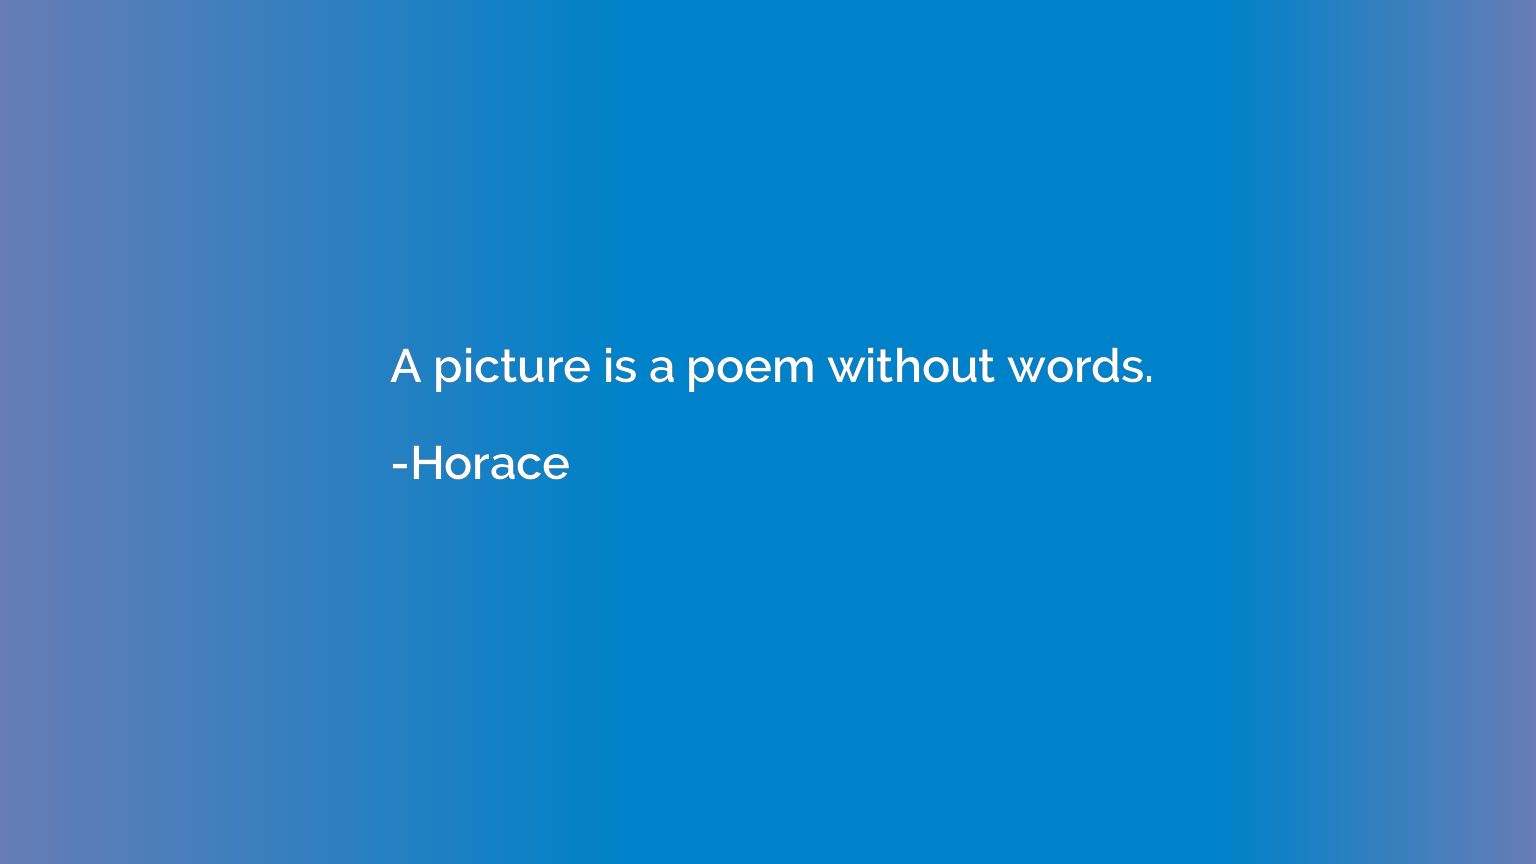 A picture is a poem without words.